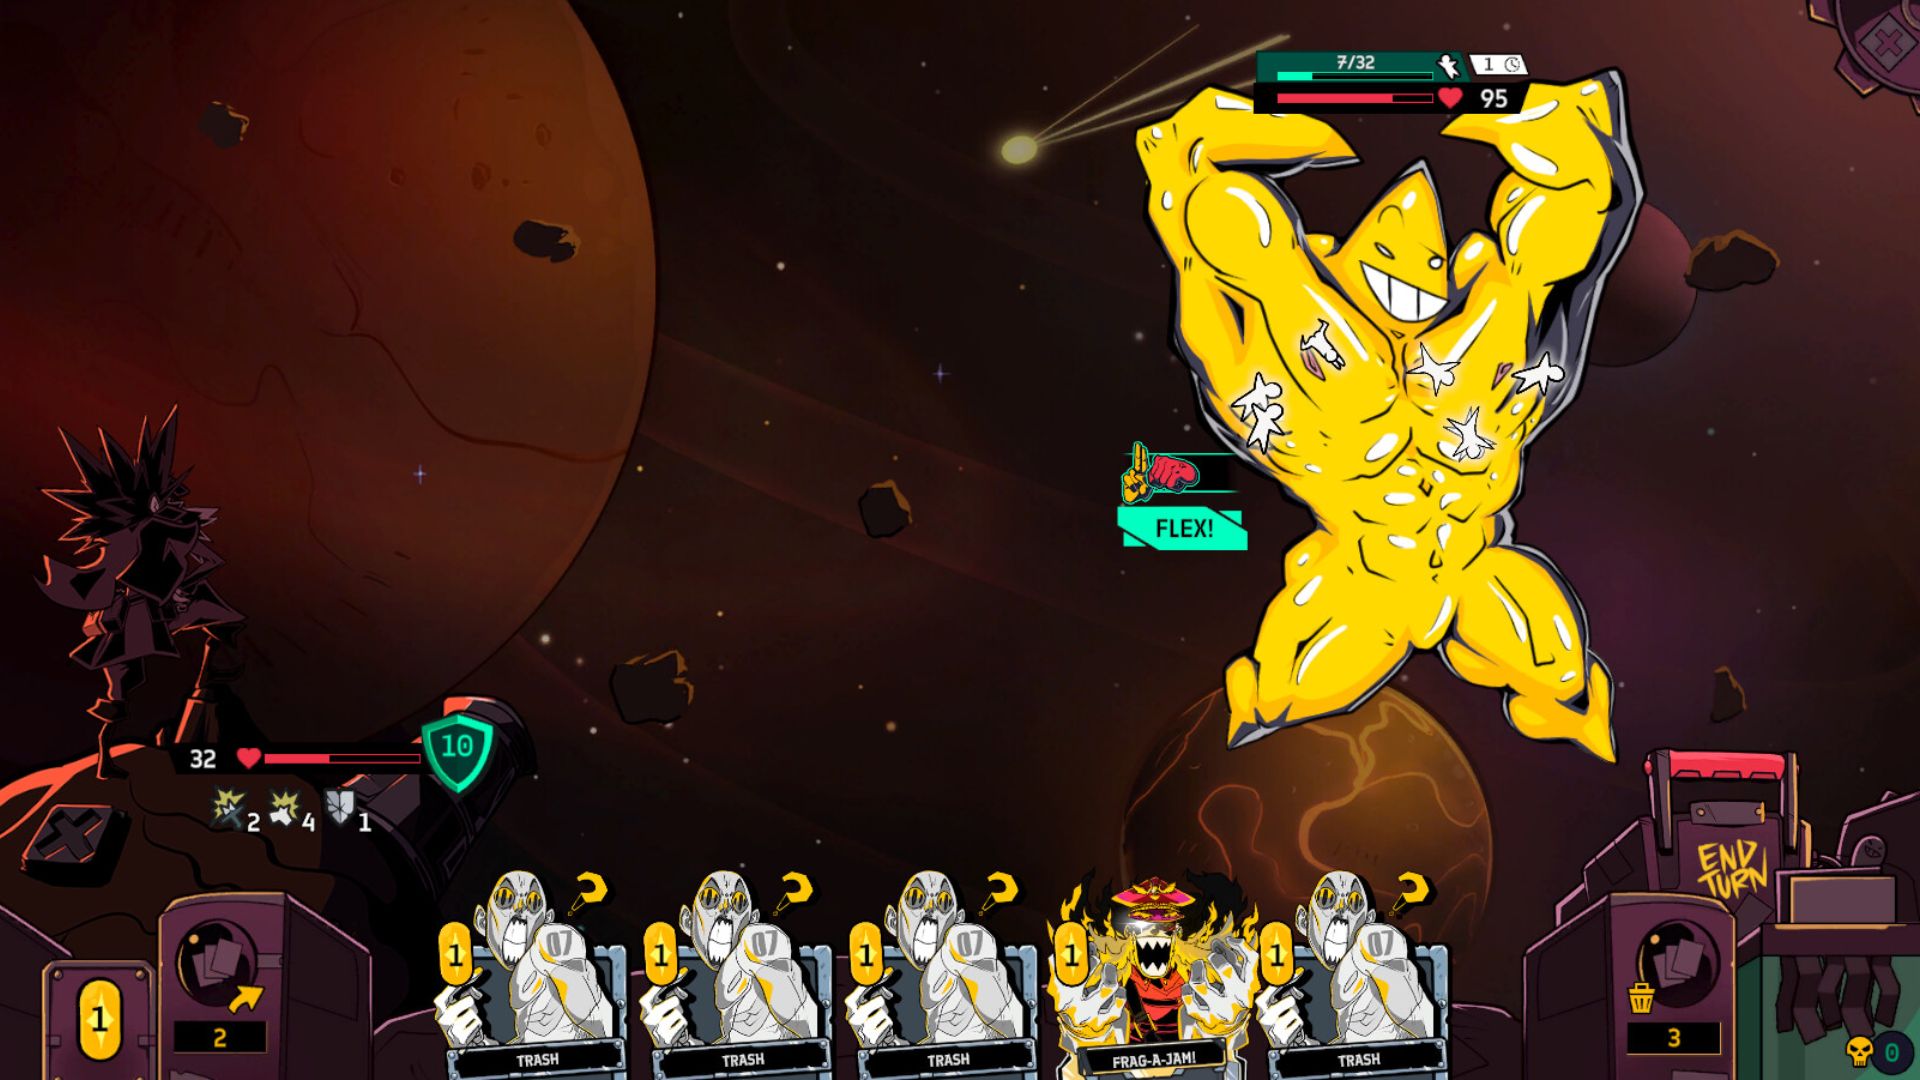 The player fighting a boss in Zet Zillions